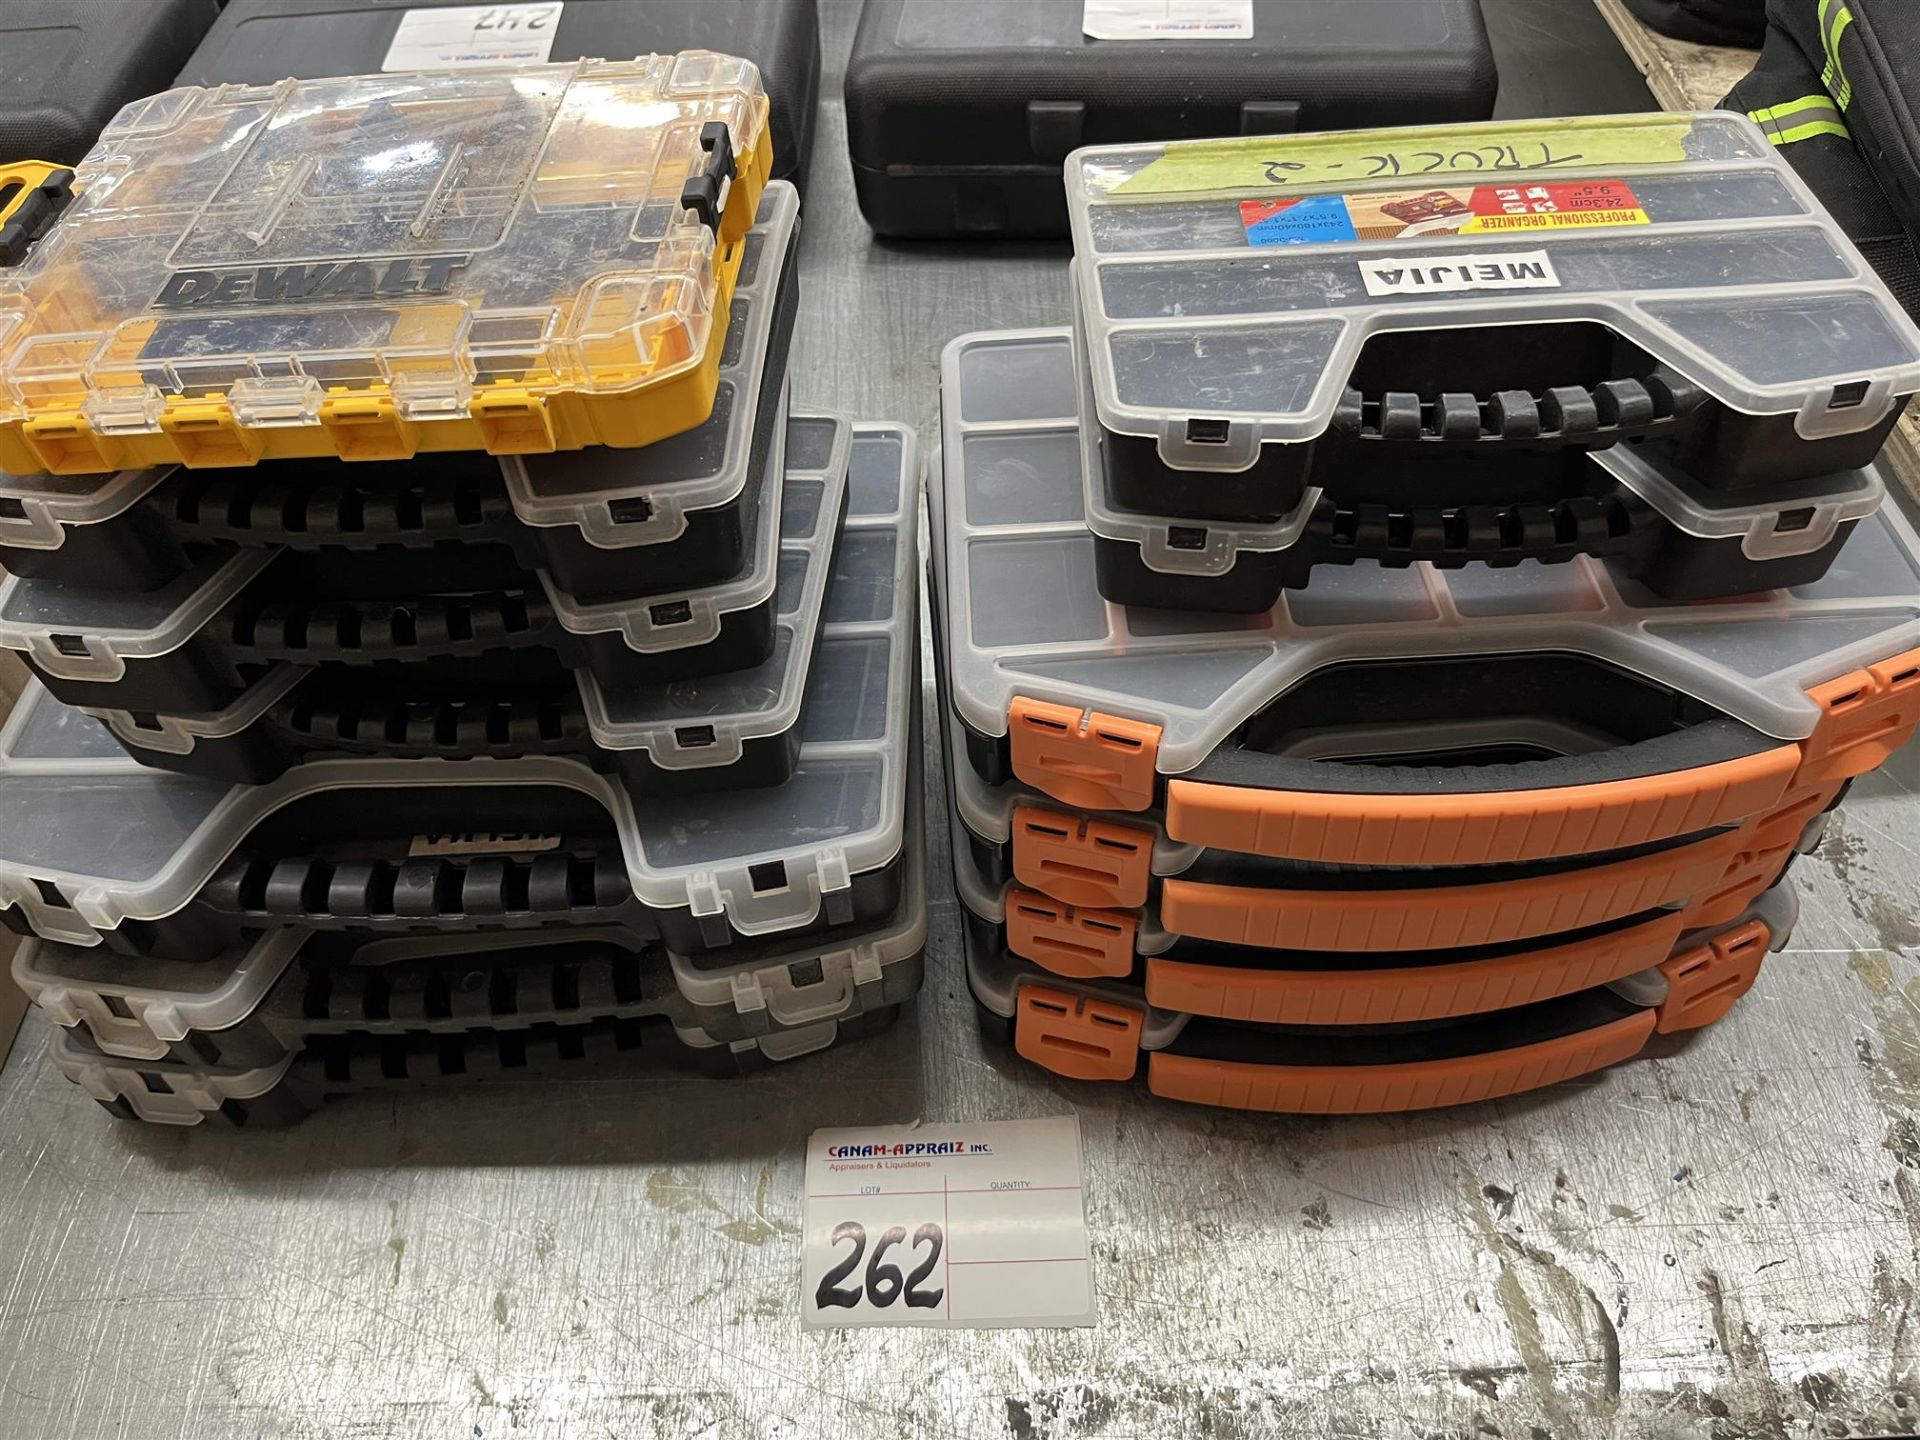 Lot of Small Parts Organizer